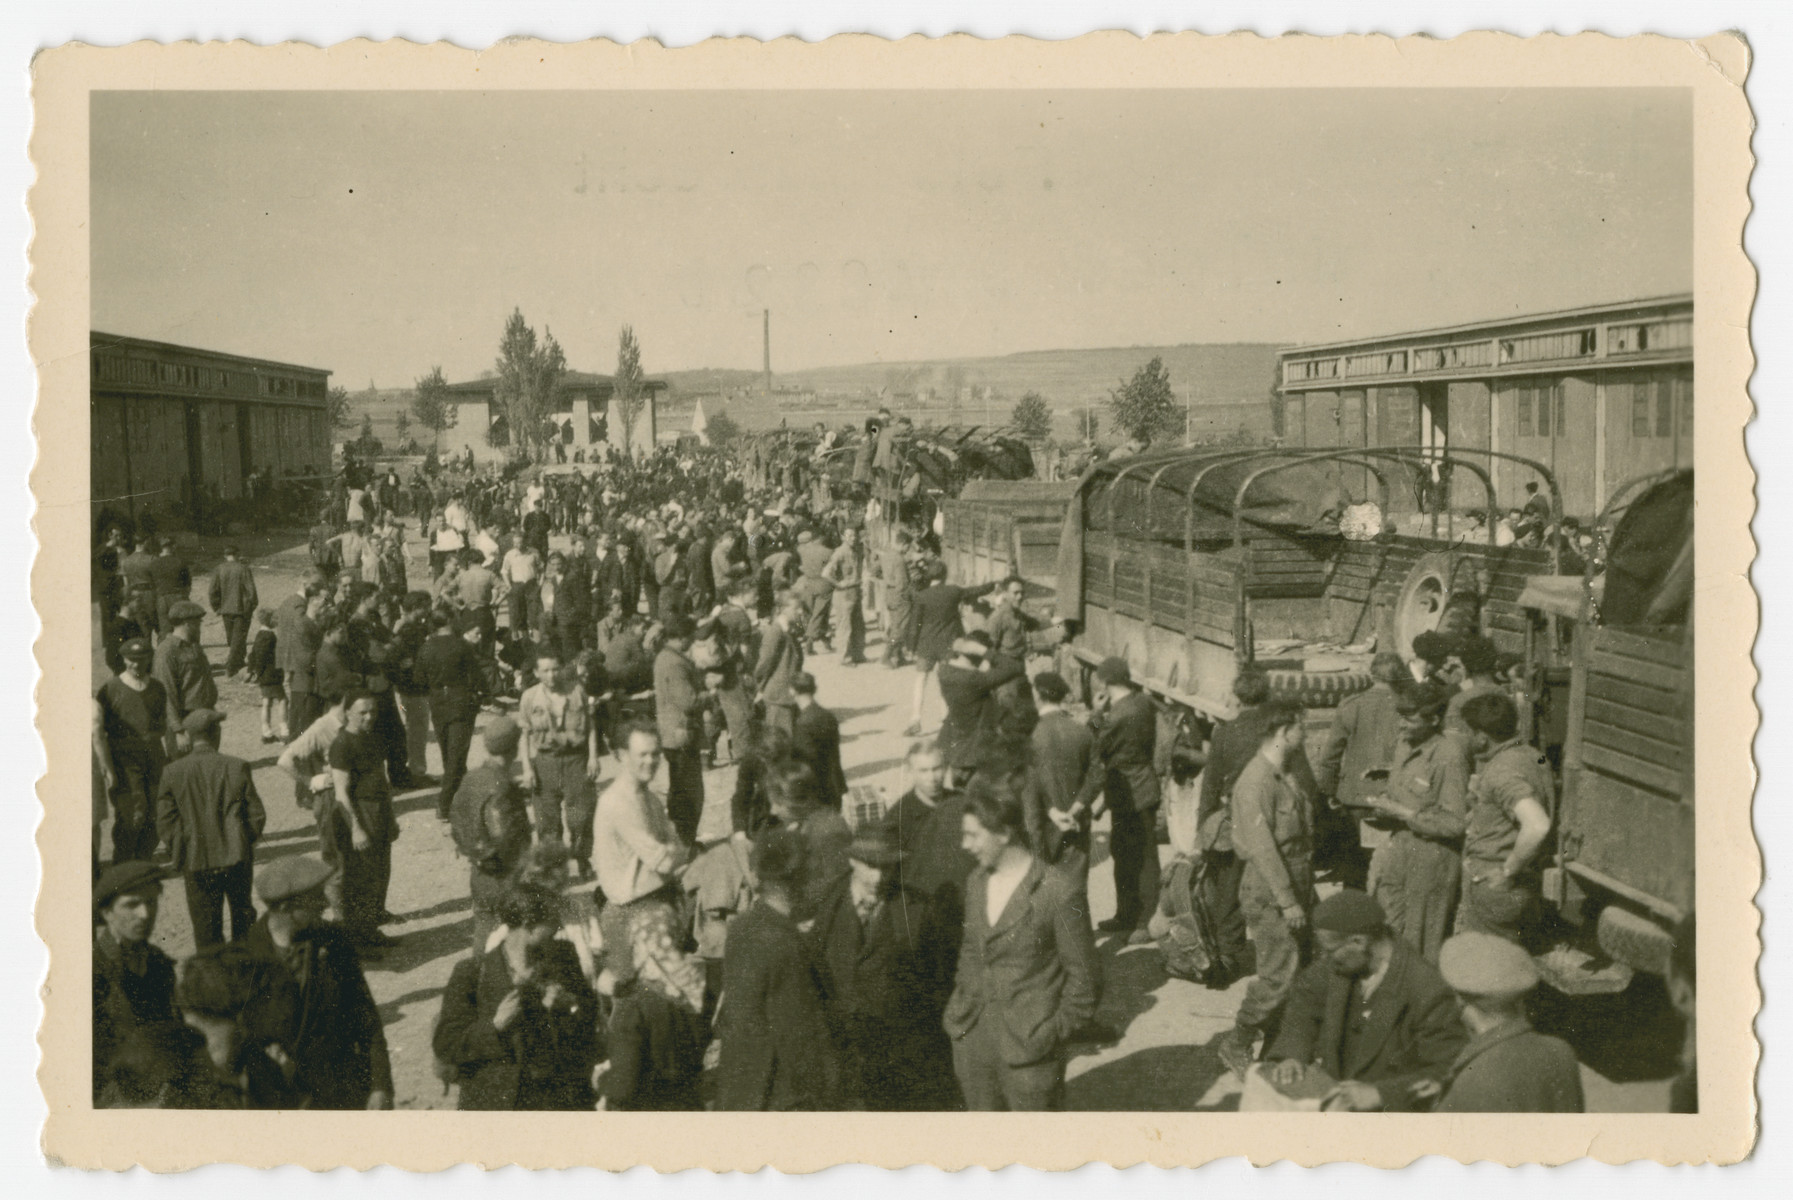 A group of survivors get off transport trucks on arrival [probably at the [Eisenach displaced persons camp.]

The original caption reads, "They unload and get deloused and there is much confusion and they are human beings with hopes."